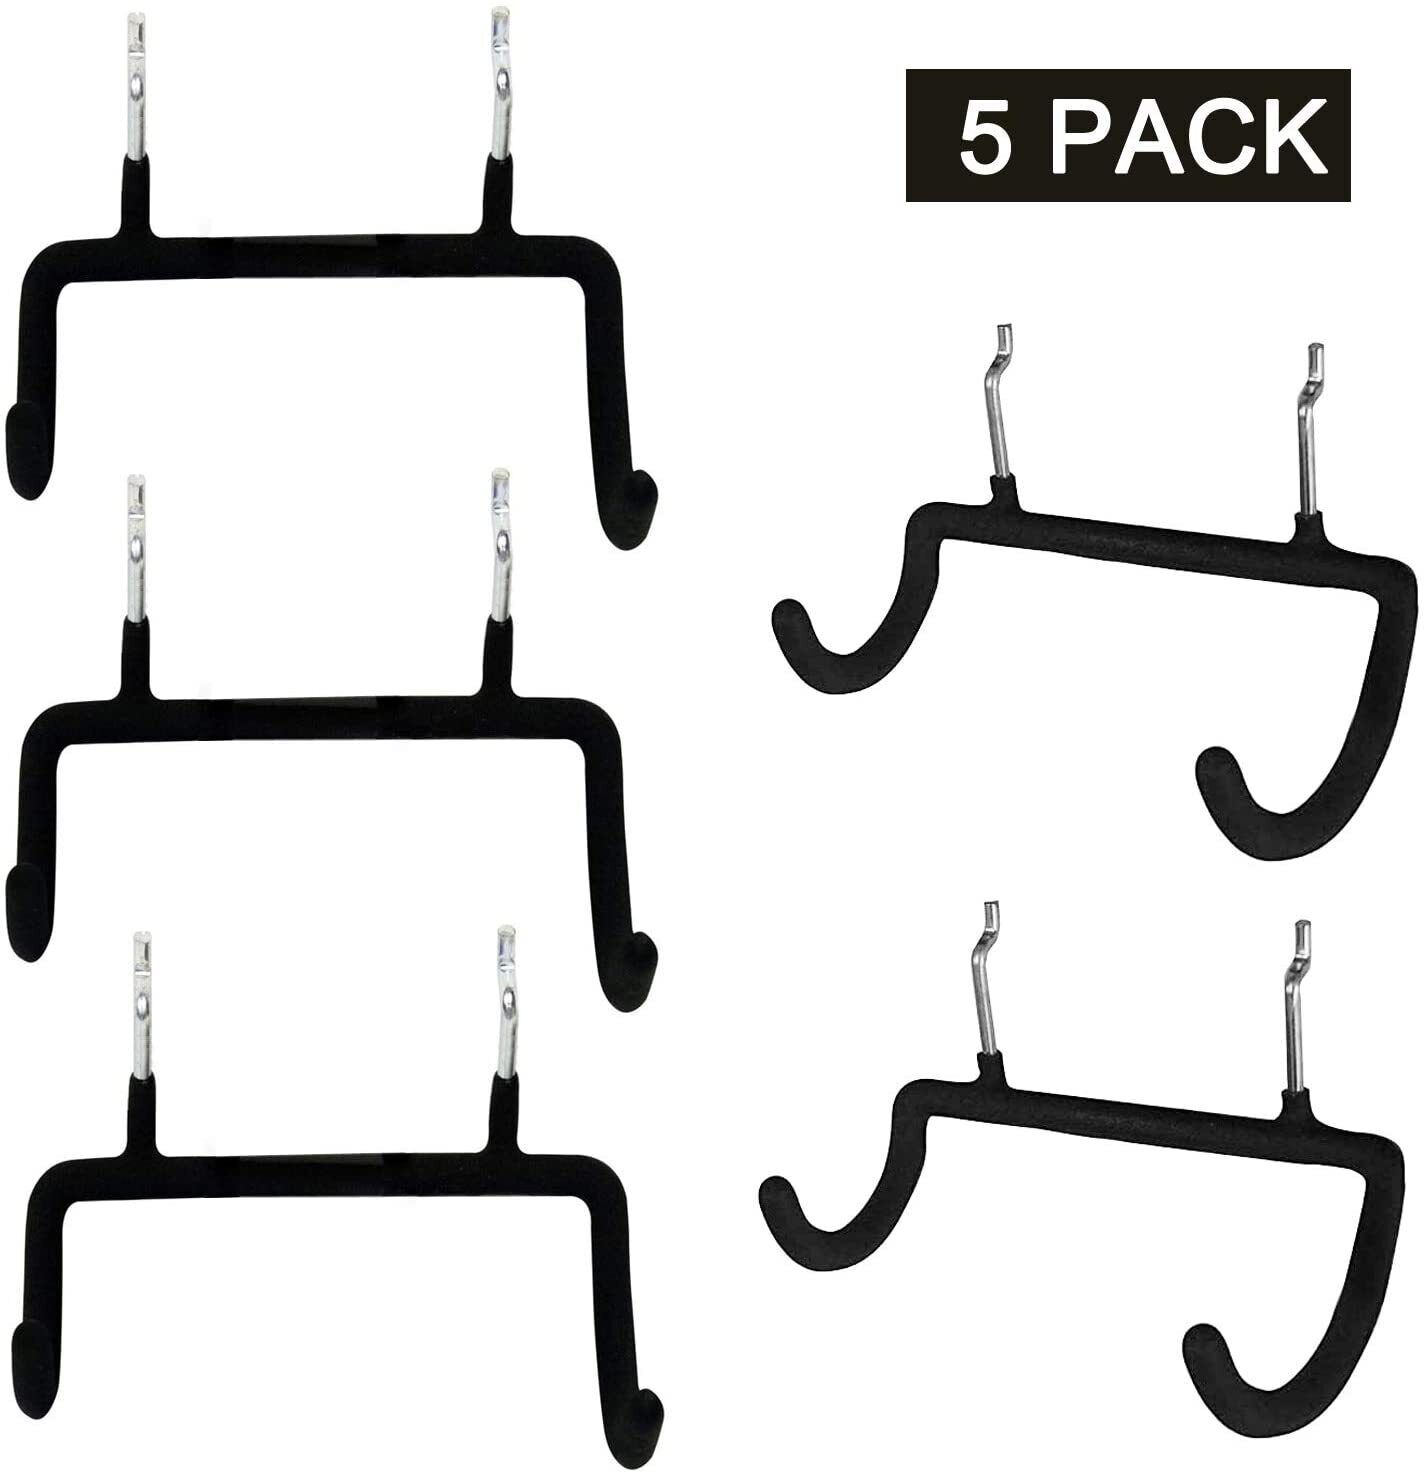 5 Pack Pegboard Power Tool Holder Pegboard Drill Holder Utility Heavy Duty